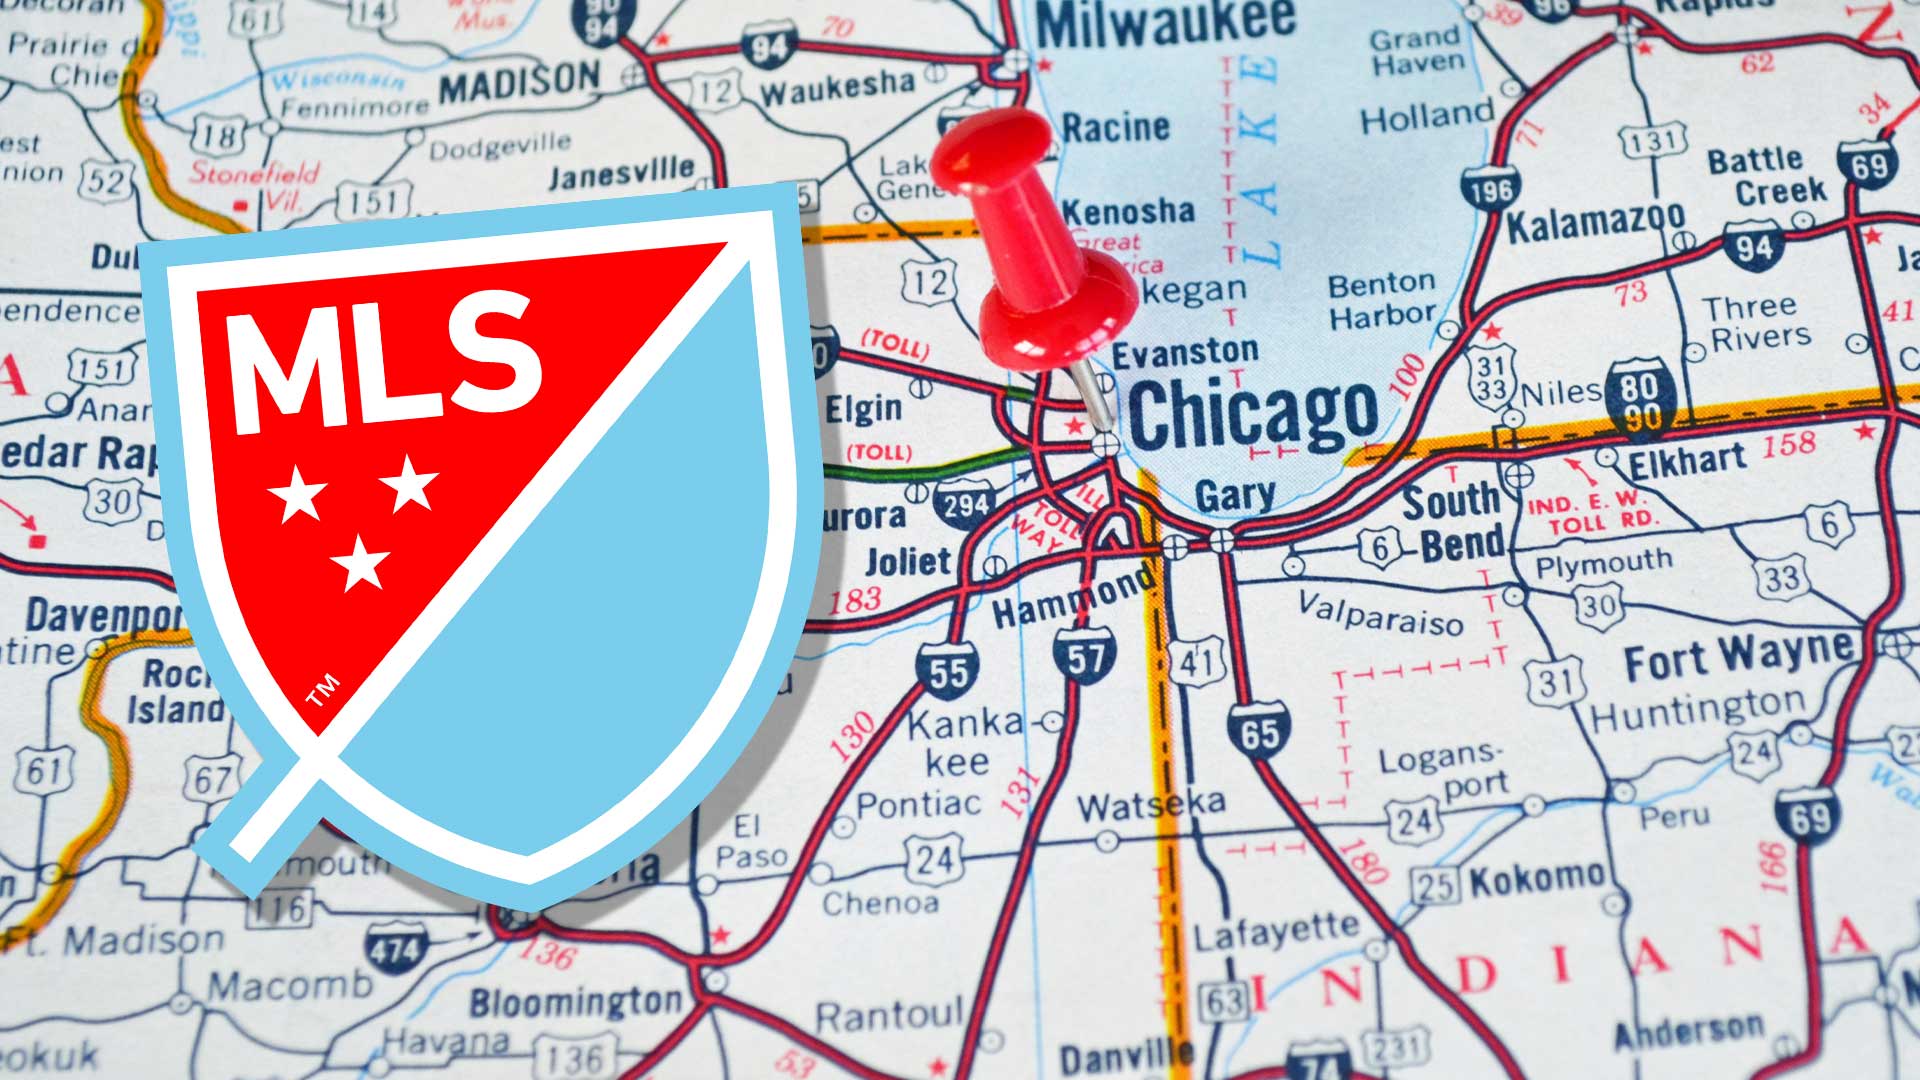 MLS Chicago Fire crest over a map of the city